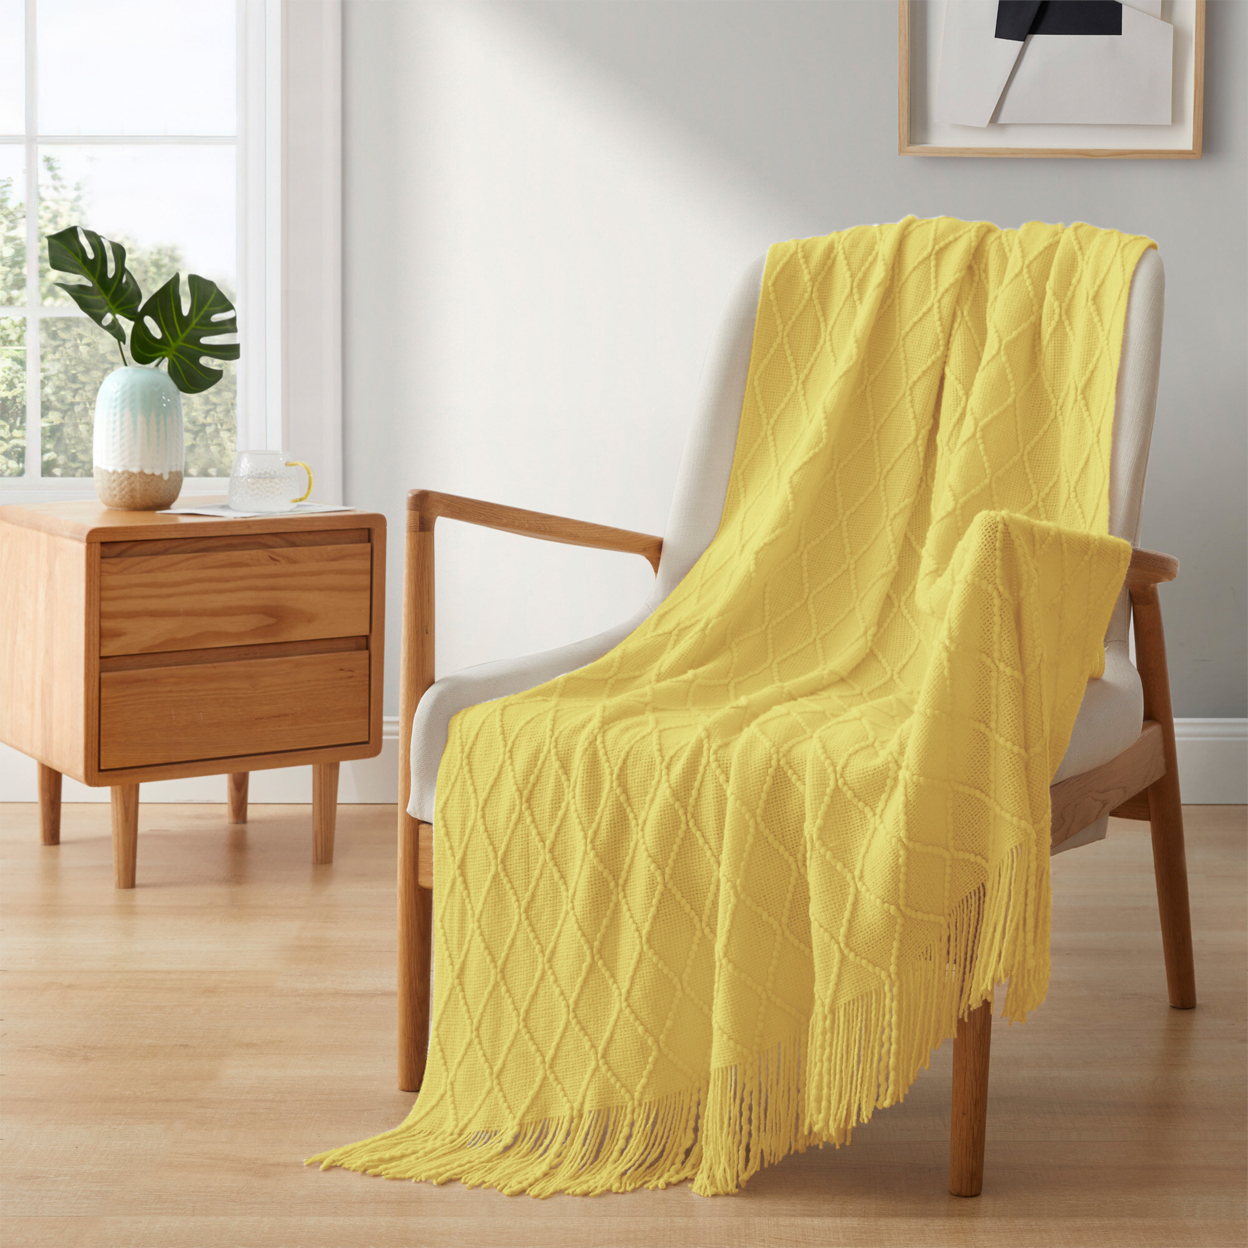 Ultra Soft Diamond Knit Throw Blanket 50x60-Perfect For Year-round Comfort - Yellow, 50 In X 60 In